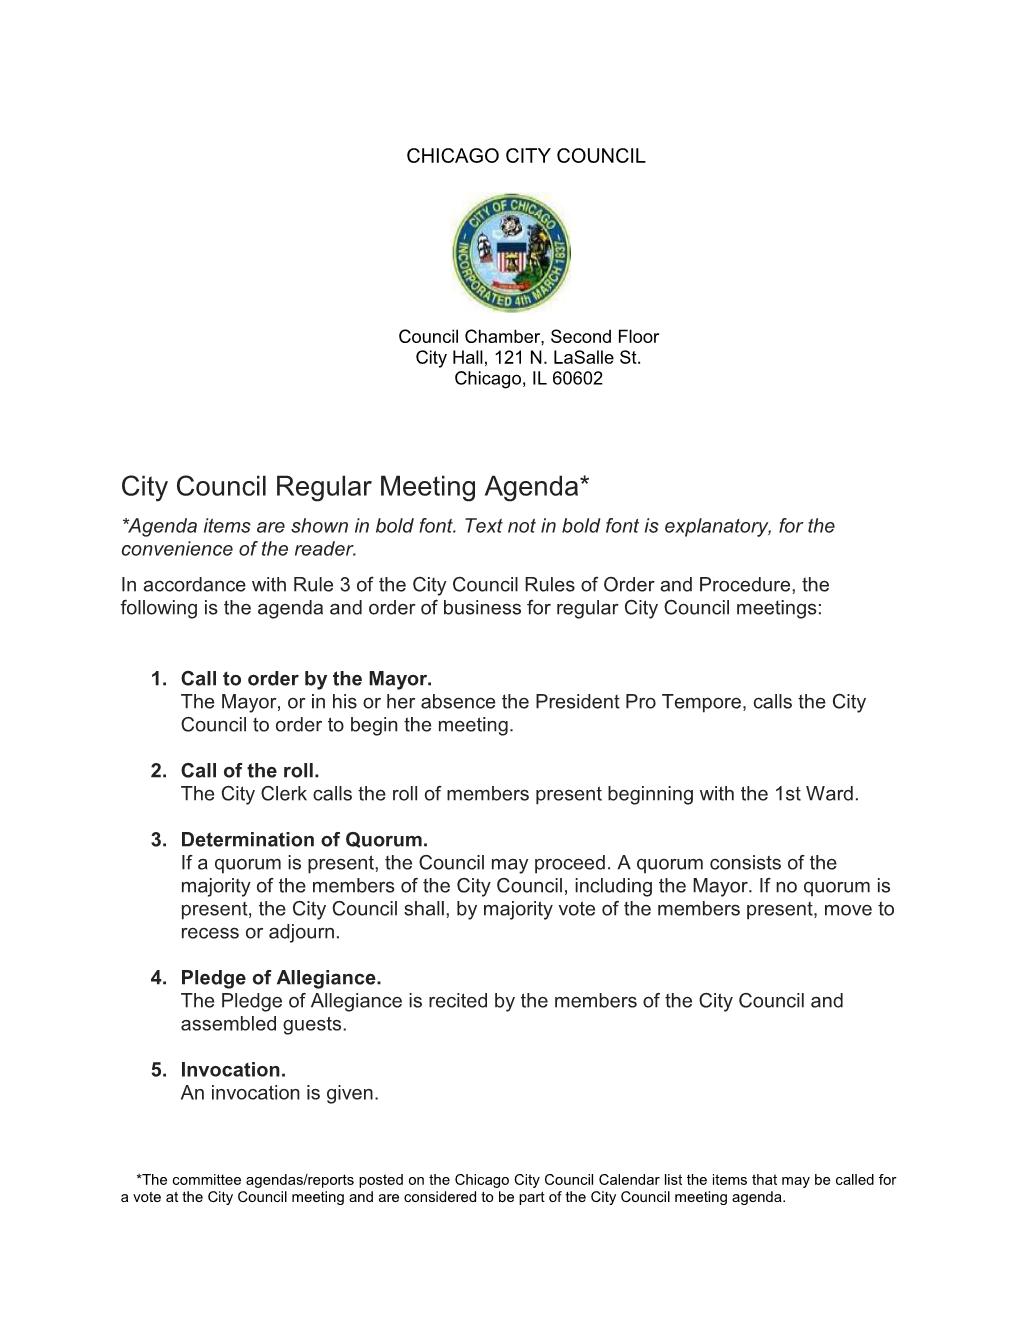 City Council Regular Meeting Agenda* *Agenda Items Are Shown in Bold Font